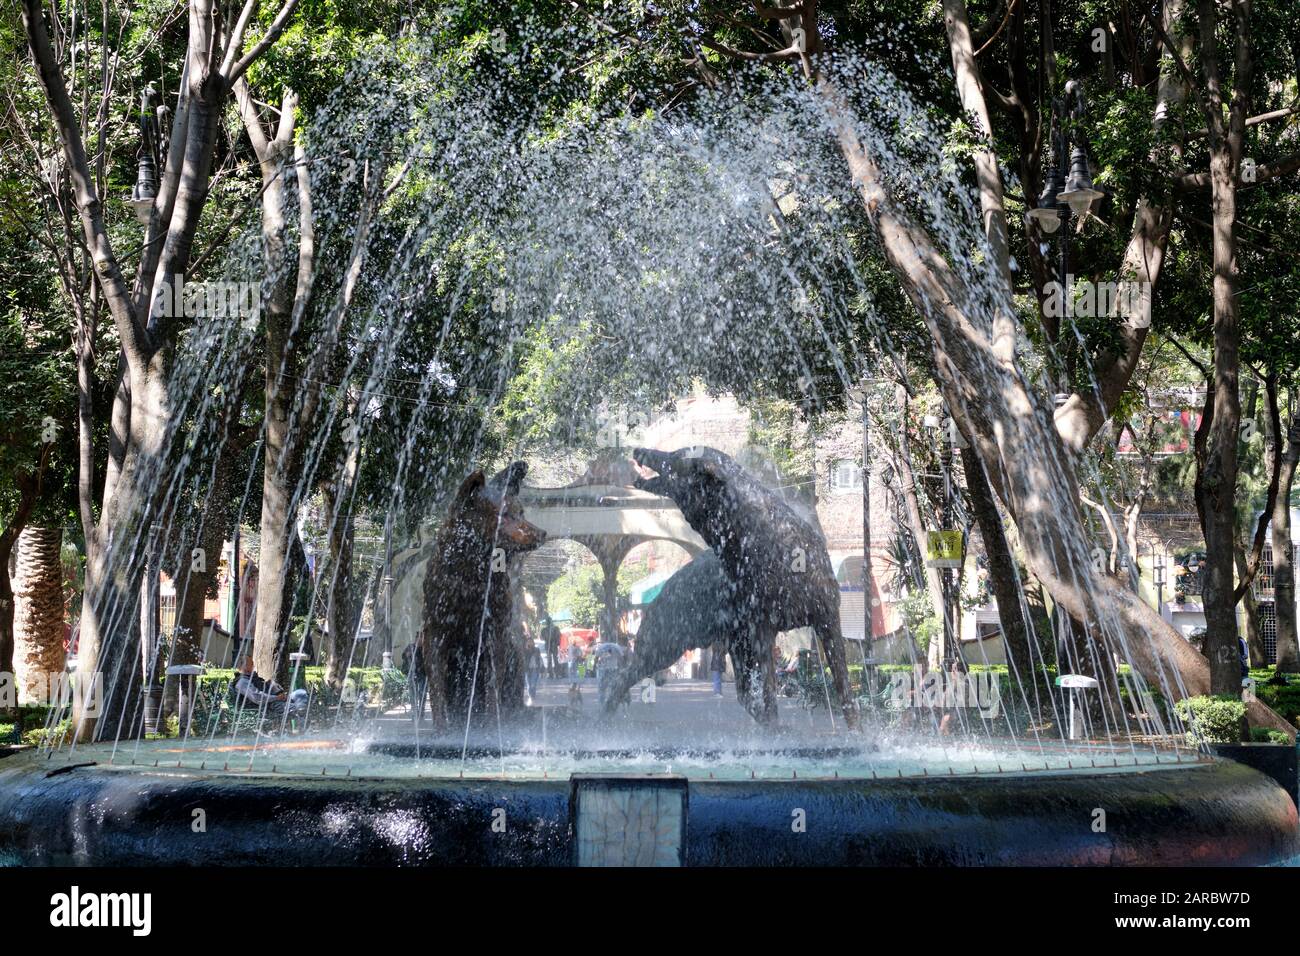 Fountain featuring two coyotes statue in middle in parl filled with trees in the Coyoacan neighbourhood of Mexico City Stock Photo